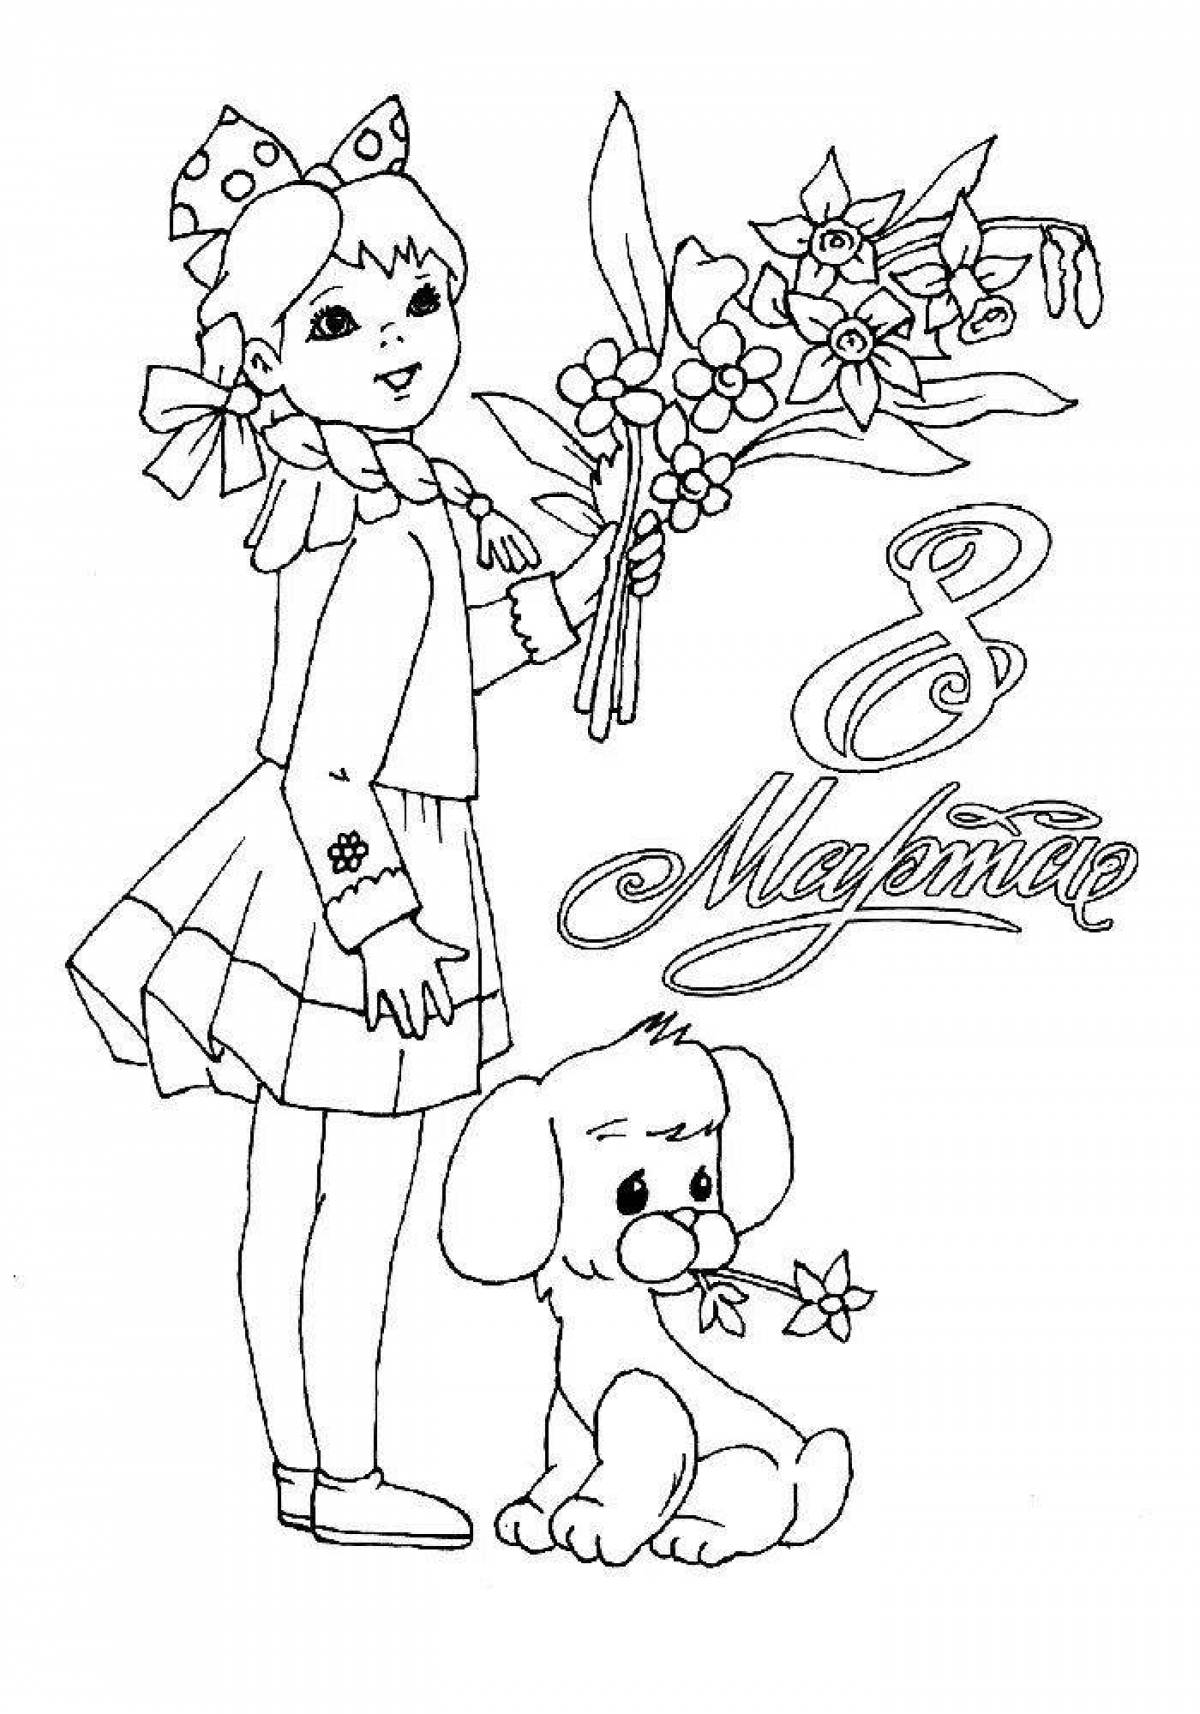 Adorable March coloring book